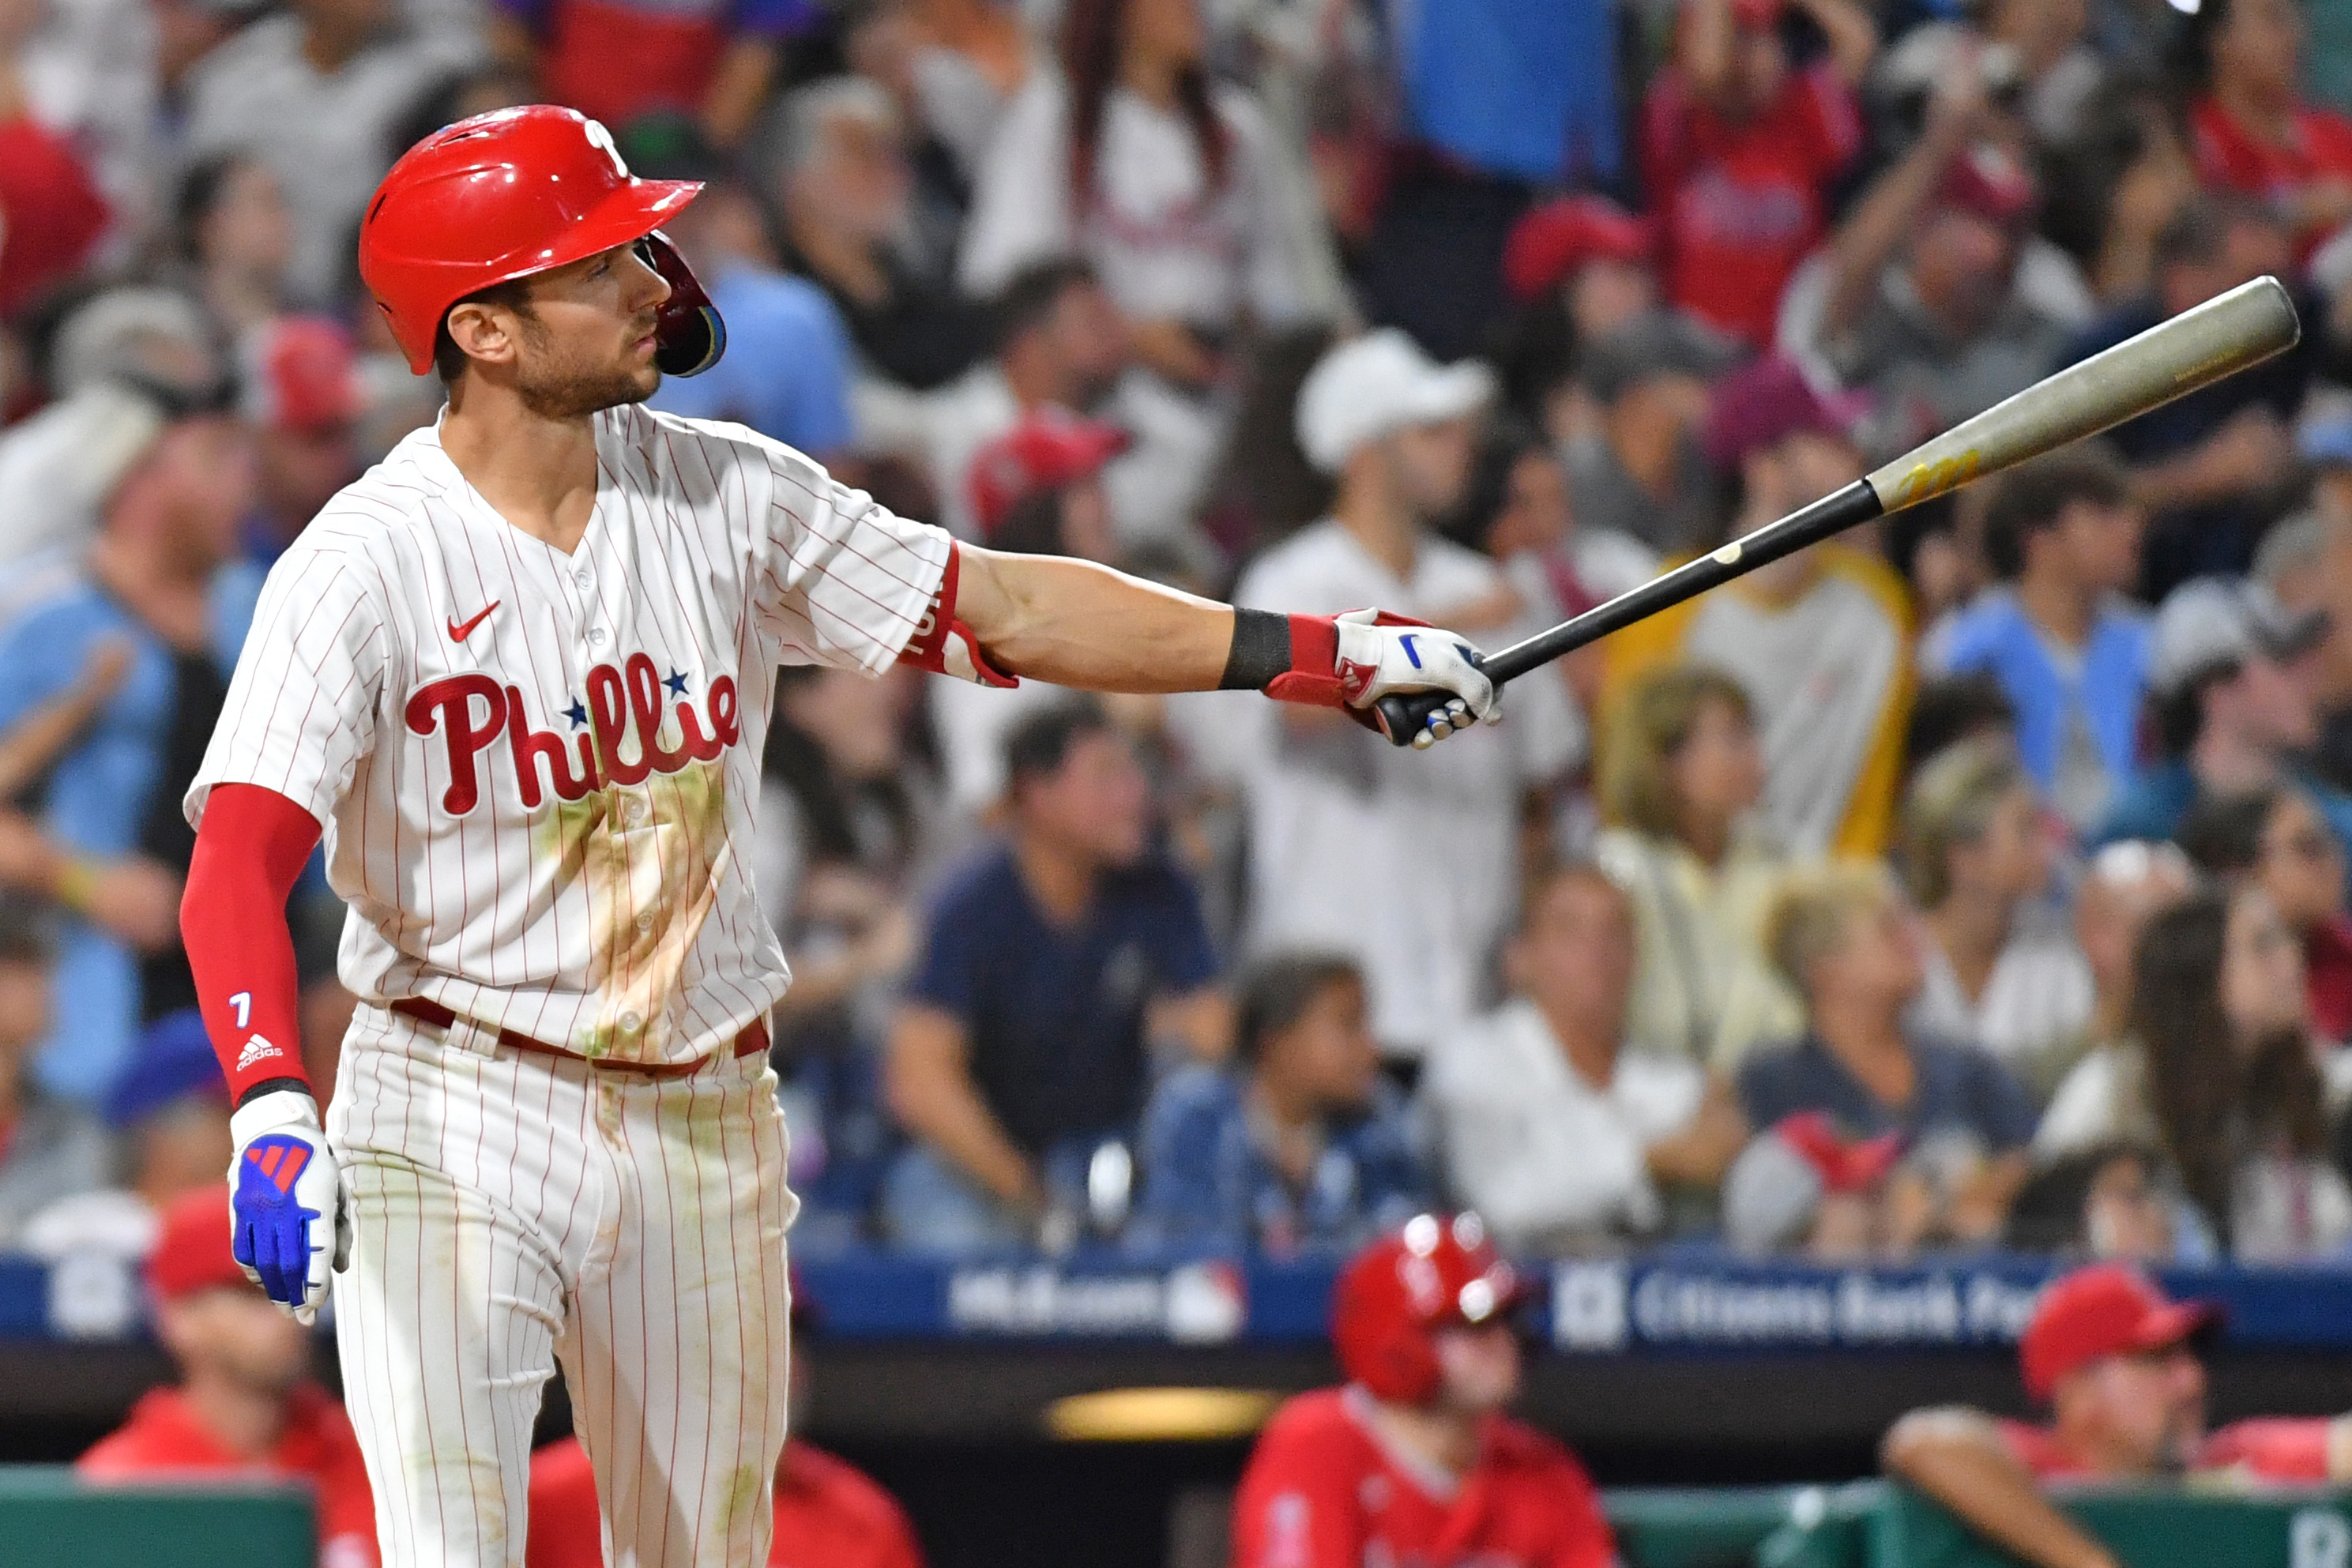 This Phillies fan proves you can catch a home run without dropping